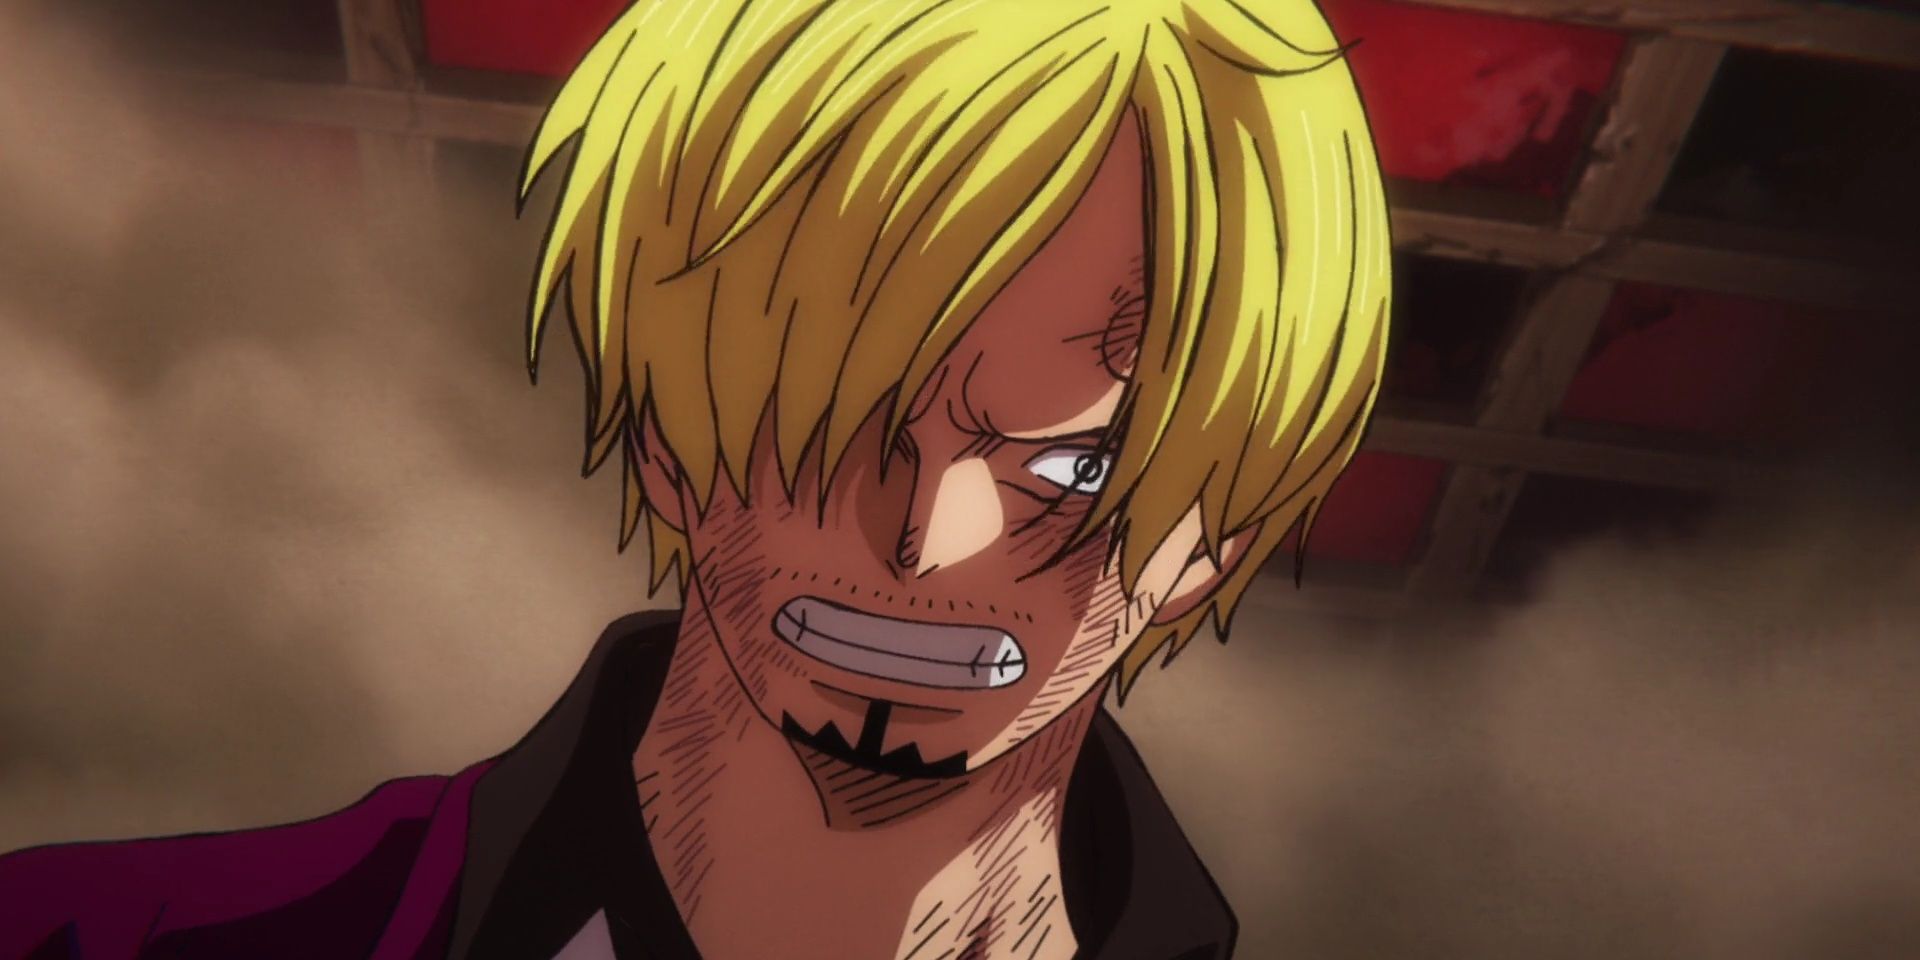 Sanji from One Piece stands with an angry and fierce expression.